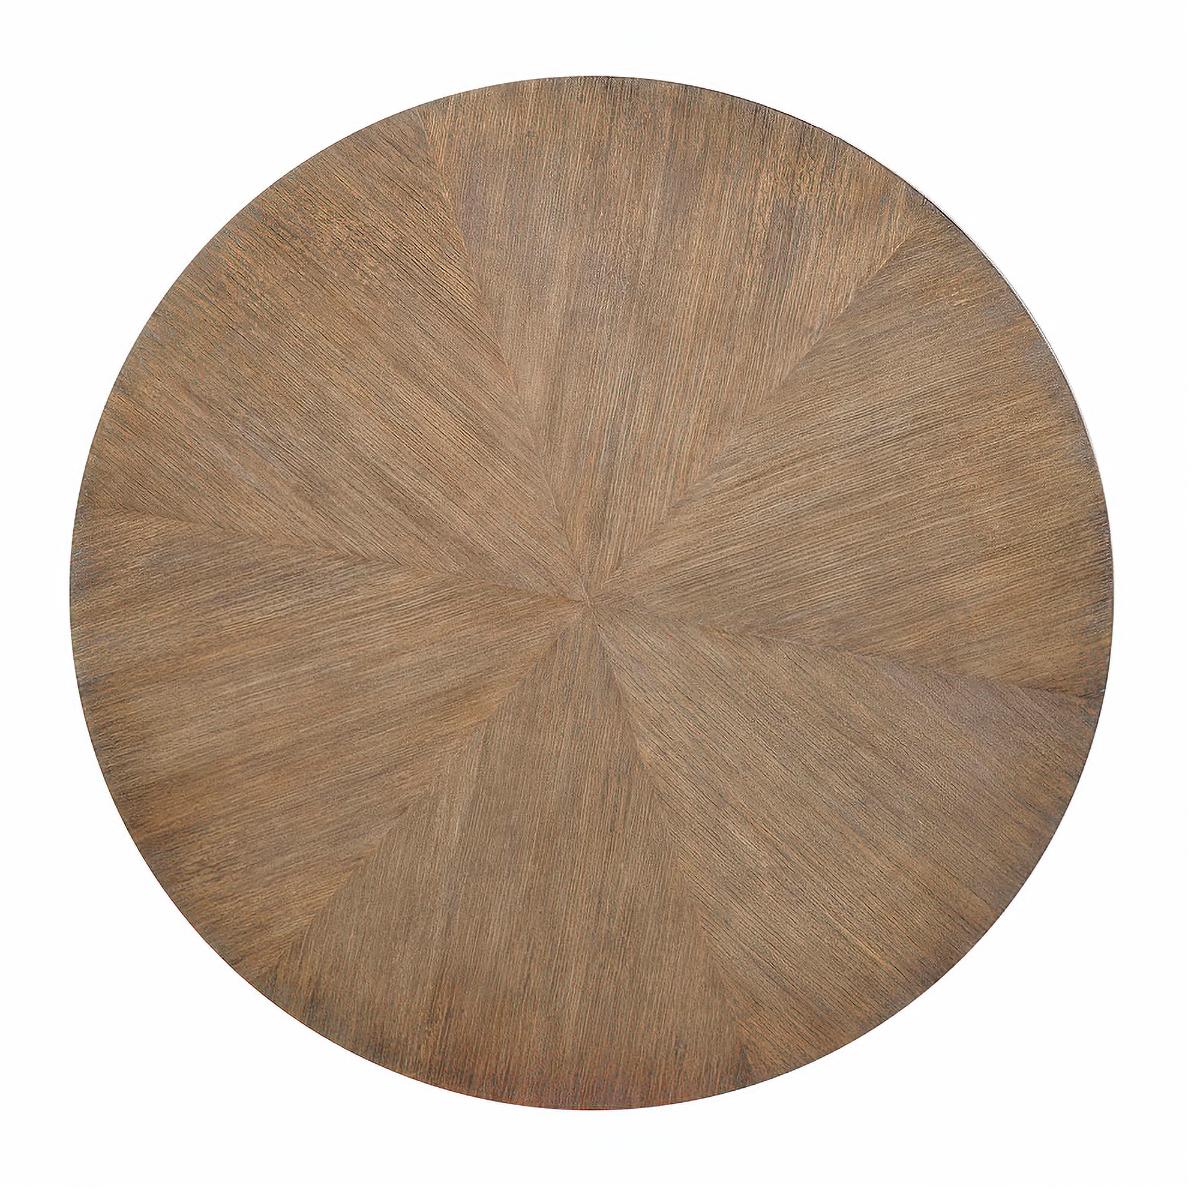 Modern round coffee table with six legs, with six-sided legs and ferrules, and a stretcher, a “natural” finish with wire brushed physical distressing and ceruse enhancing the natural highlights of the acacia veneer and an “aged bronze” finish on the